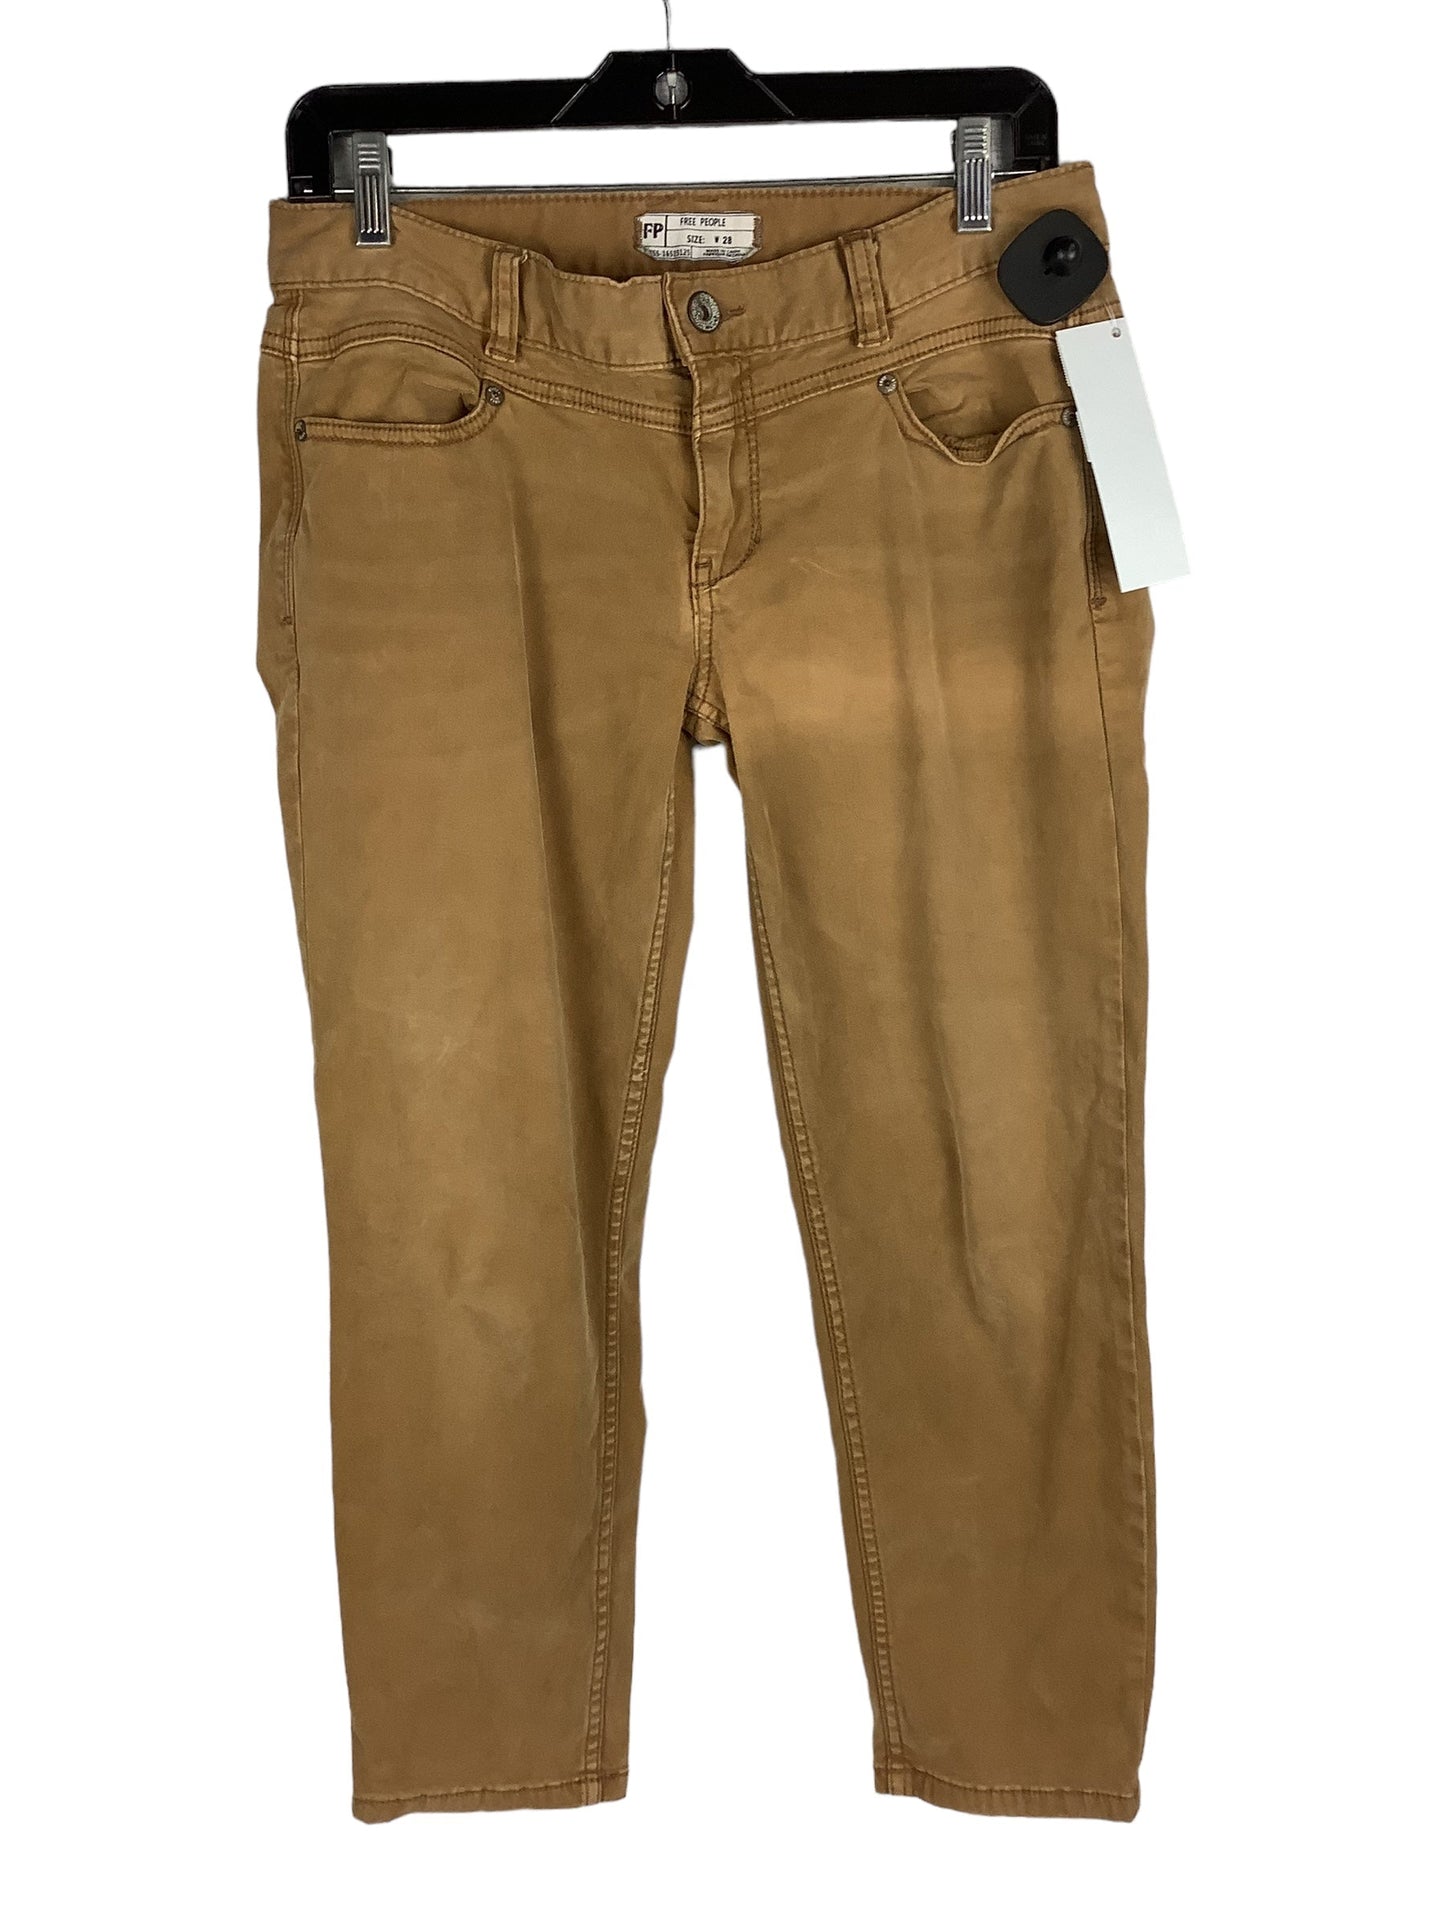 Tan Pants Other Free People, Size 28